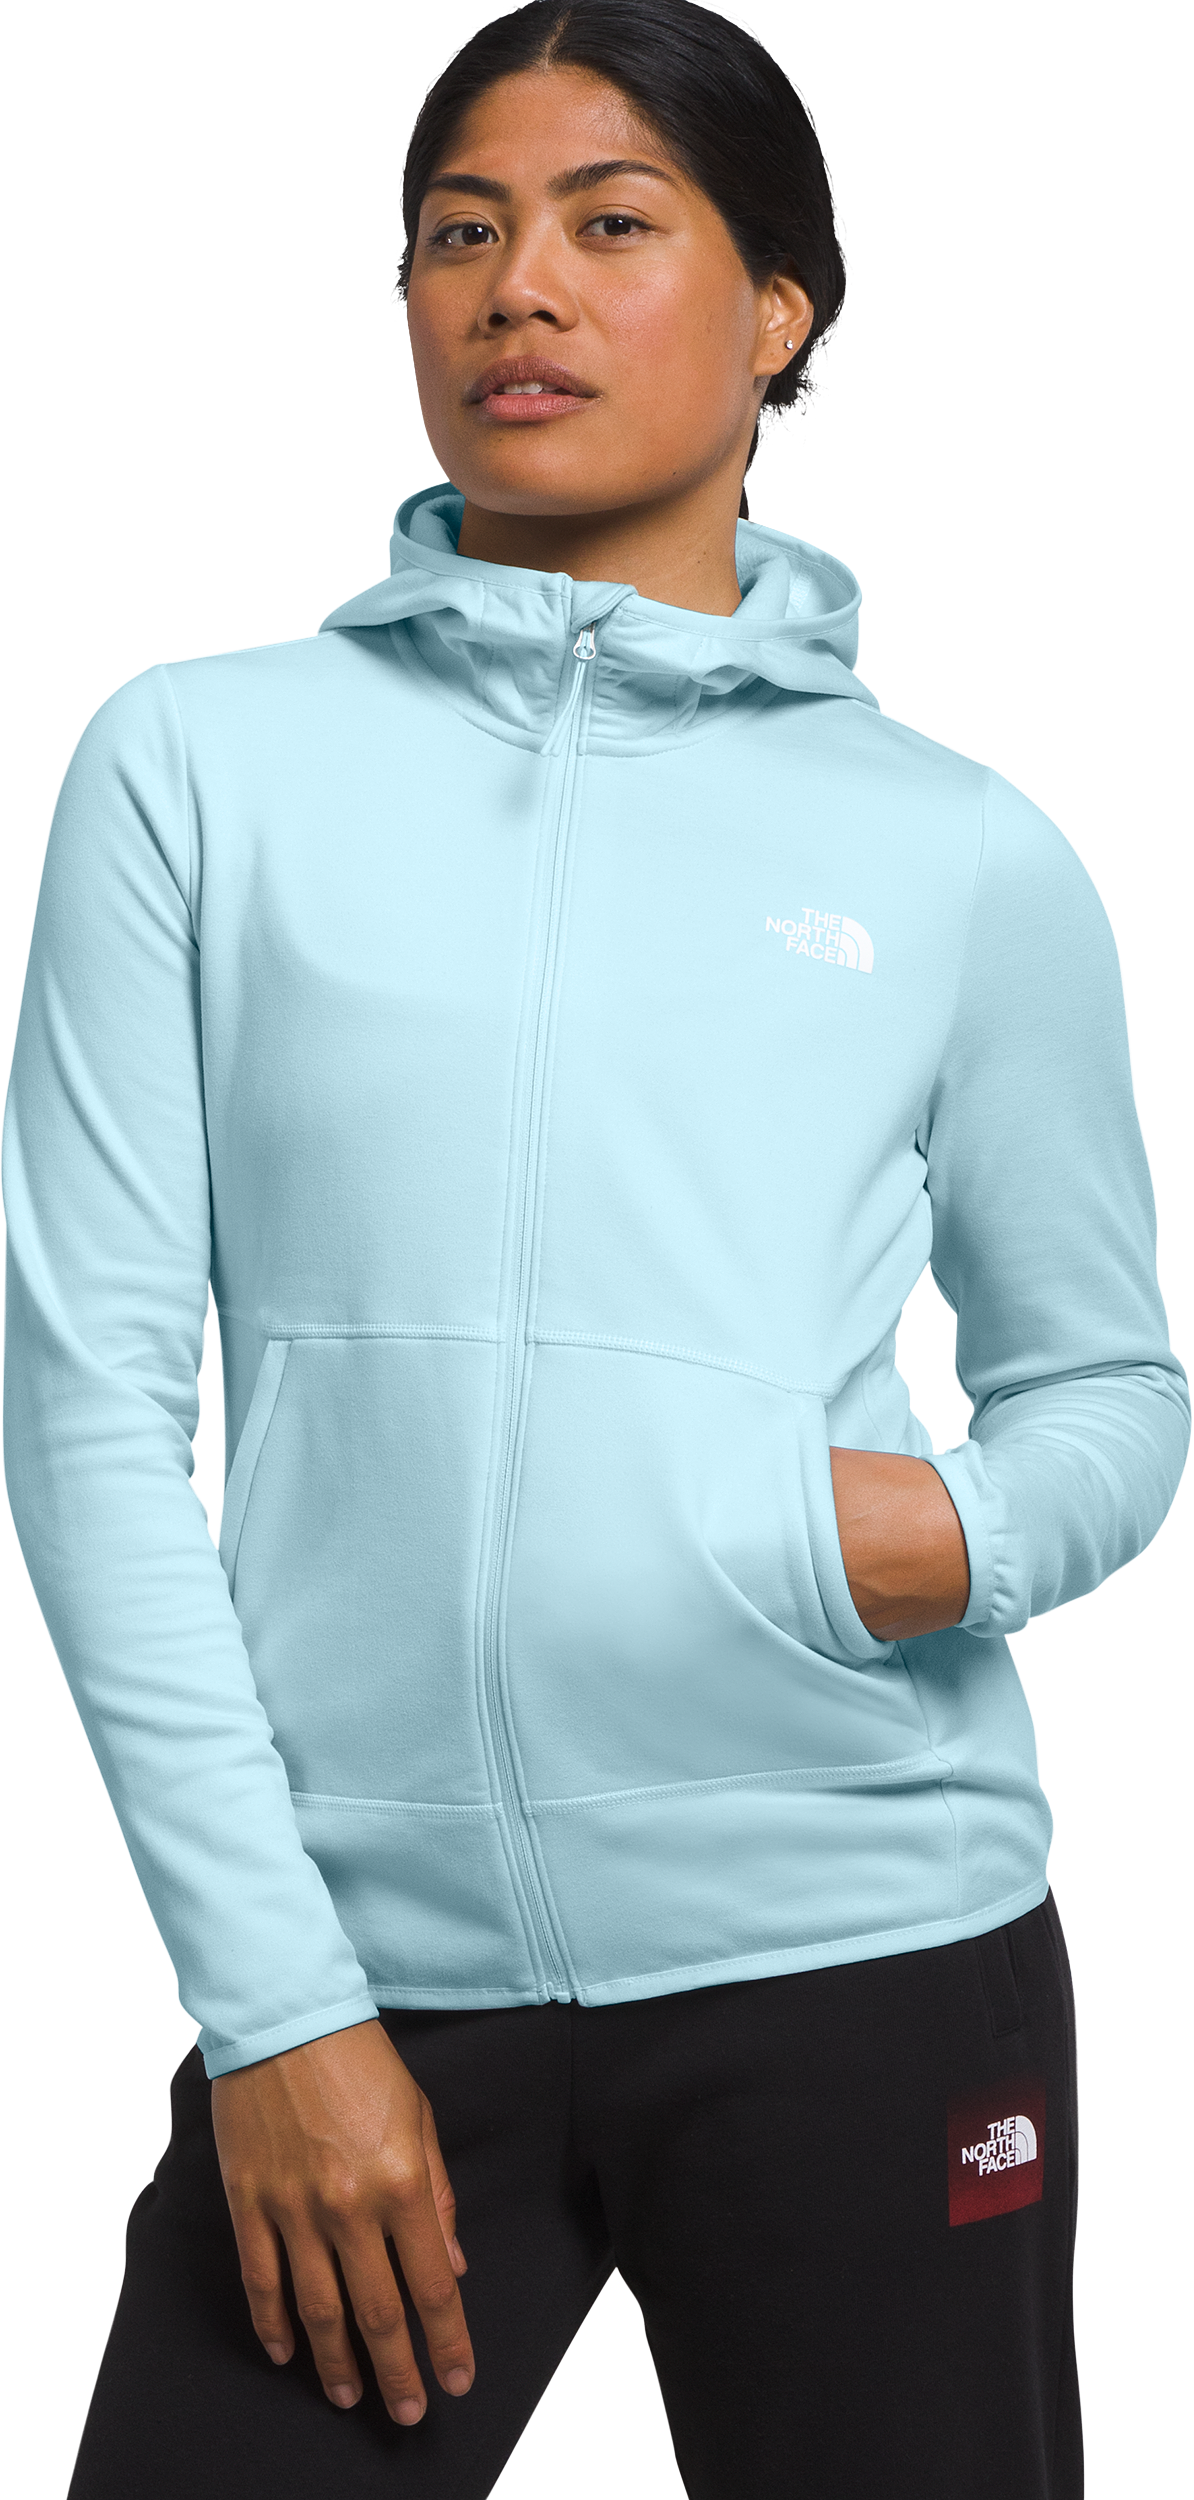 The North Face Canyonlands Full-Zip Long-Sleeve Hoodie for Ladies